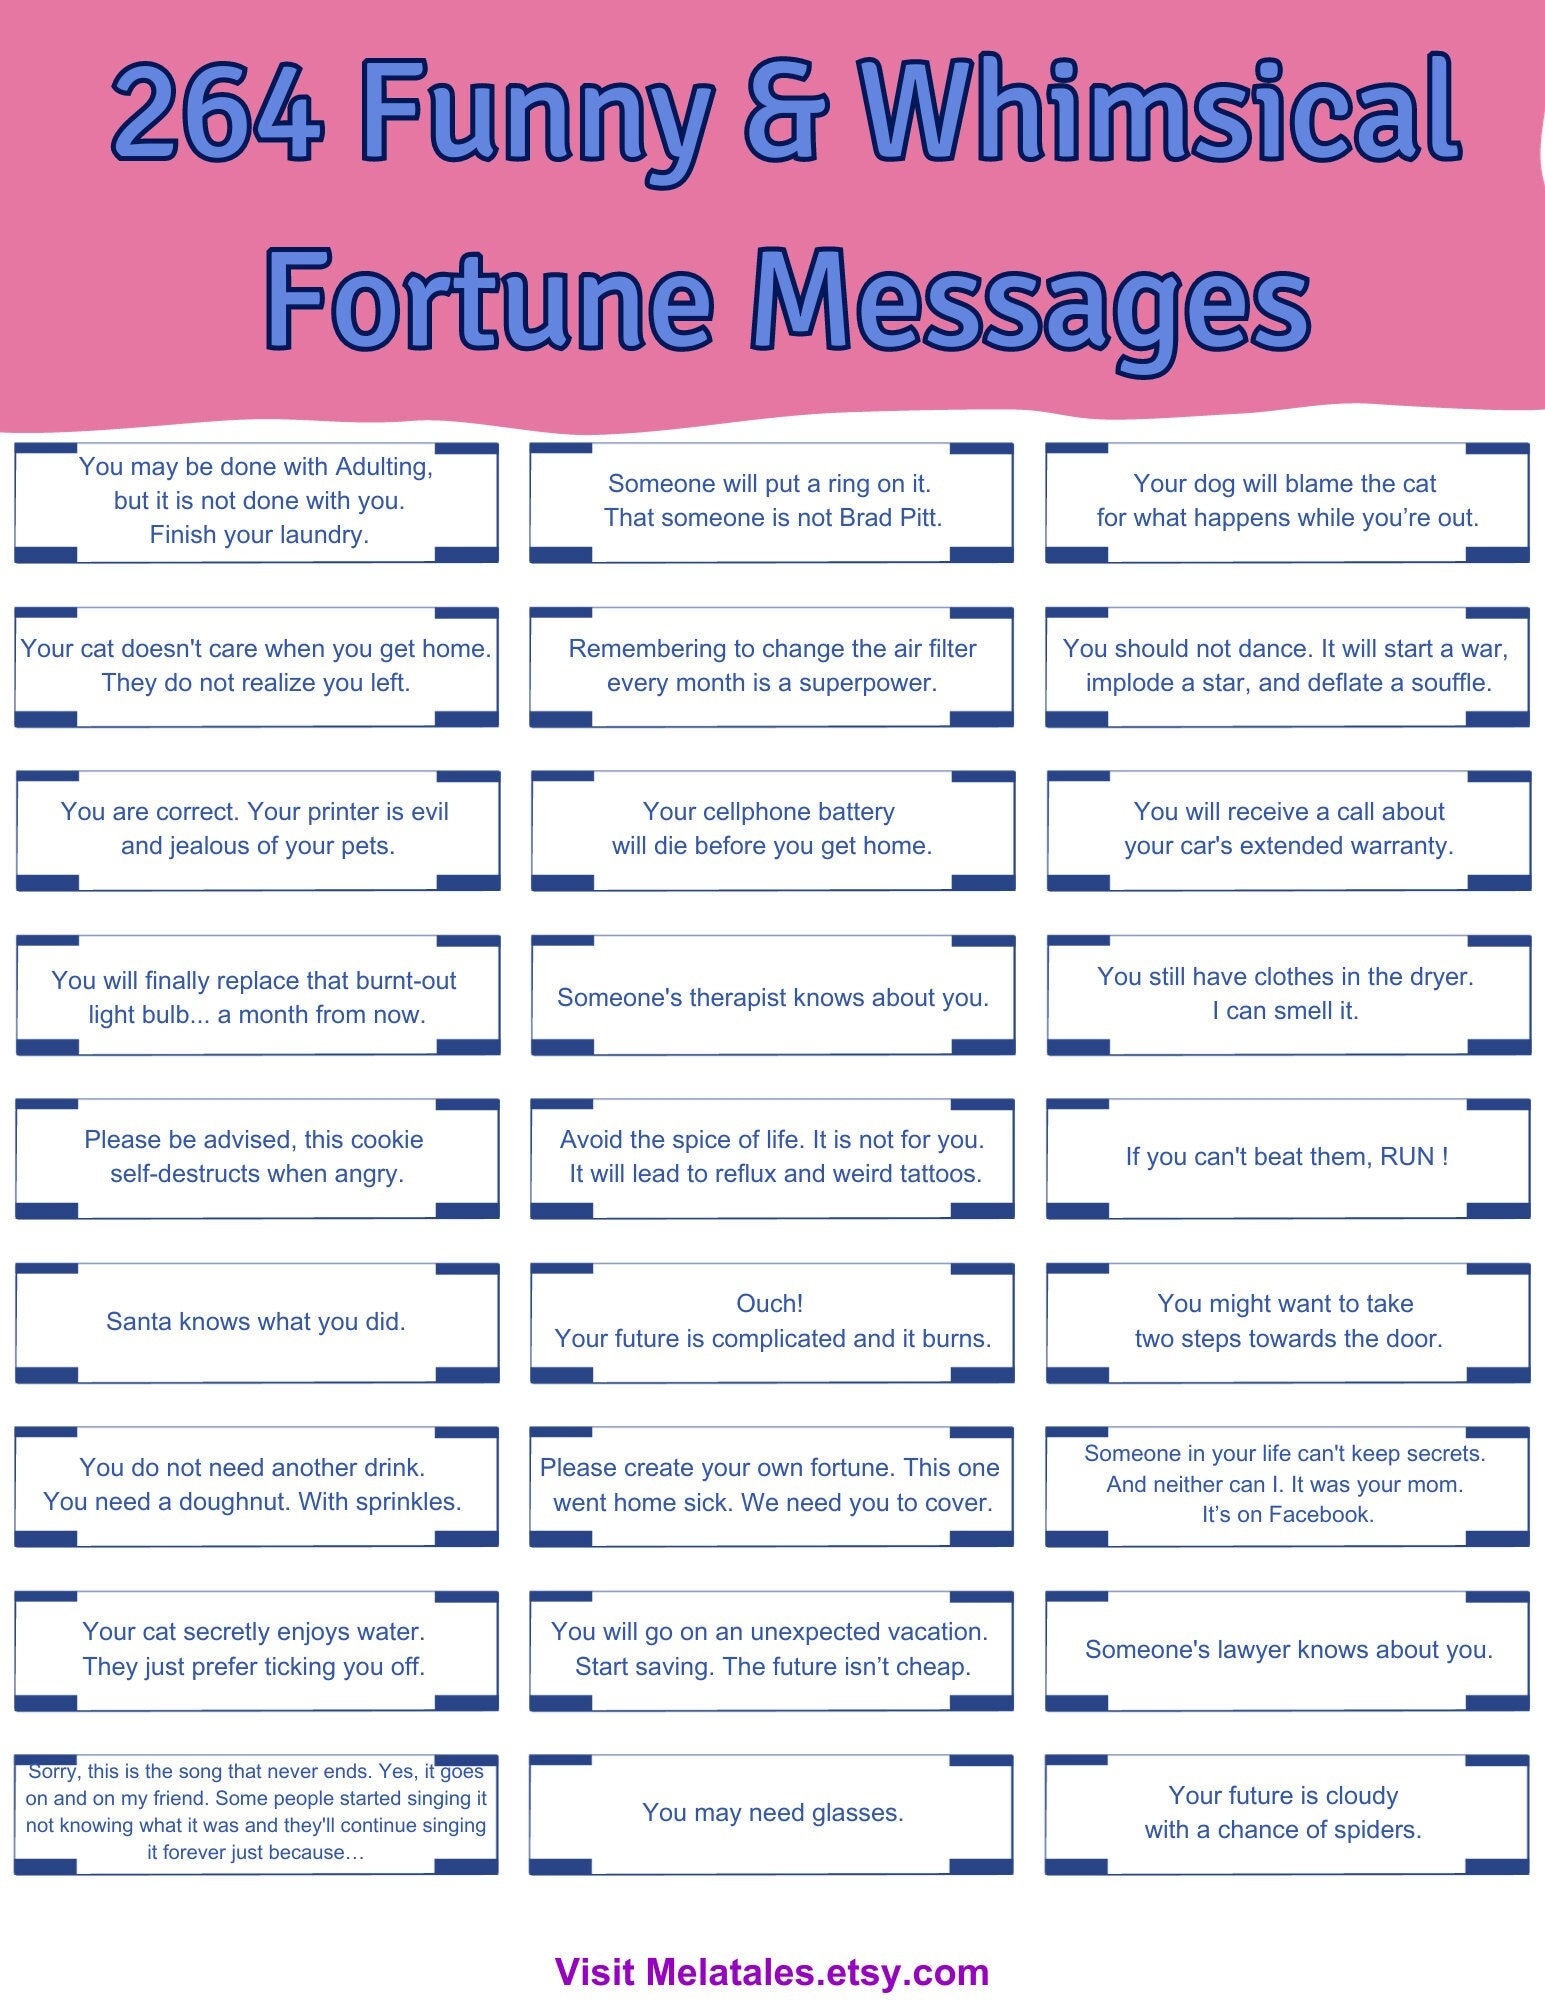 264 Funny Fortune Cookie Messages Digital Download Fun Fortunes And Messages Etsy